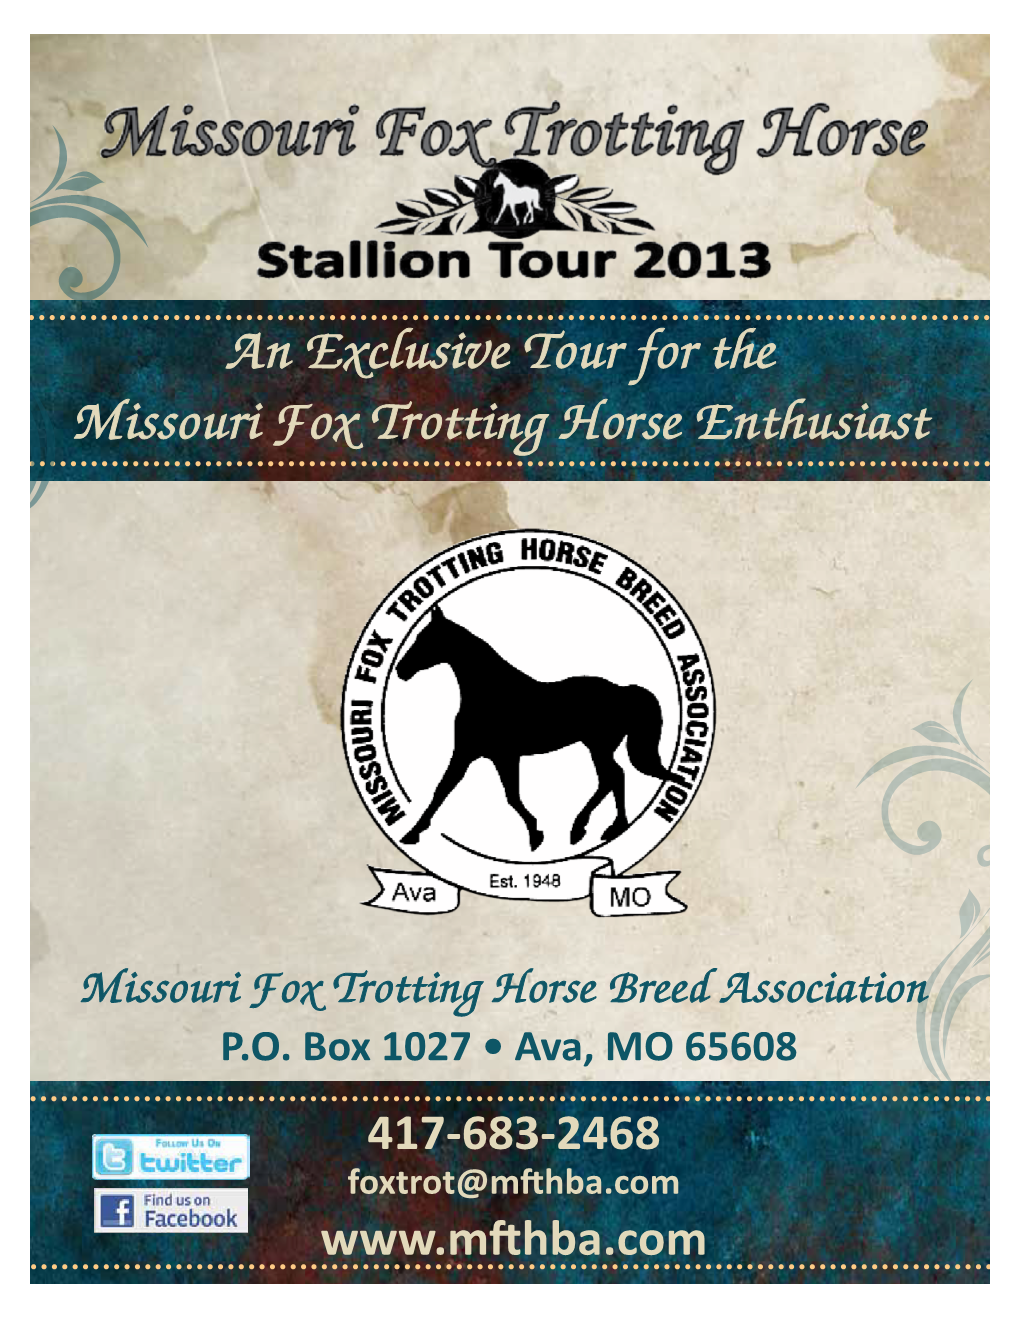 An Exclusive Tour for the Missouri Fox Trotting Horse Enthusiast